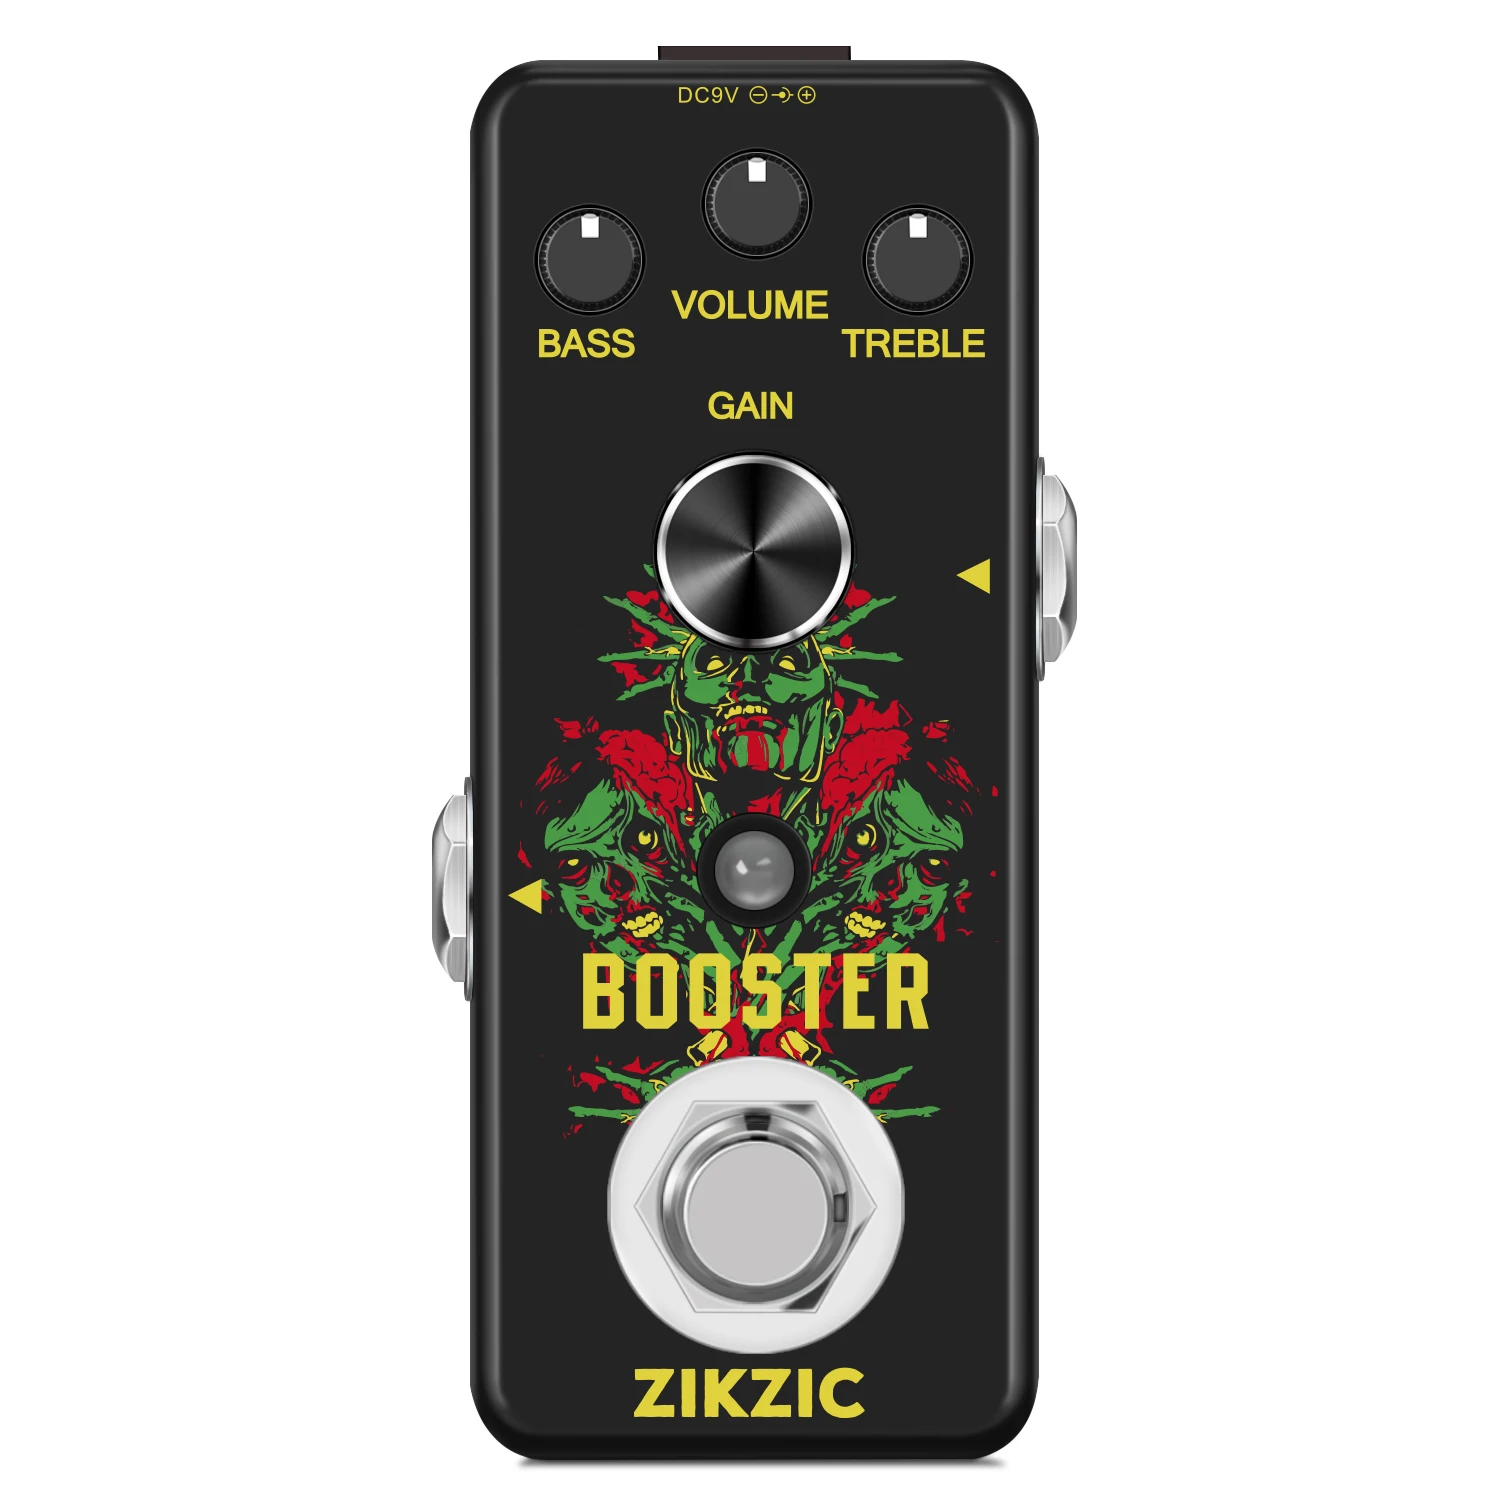 Zikzic LEF-318 Guitar Booster Pedal Pure Boost Effect Pedals Analog Pure Signal Amplification Sound Encouraging clefly lef 318 guitar booster effect pedal analog boost effects pedals pure clean mini boost pedals true bypass